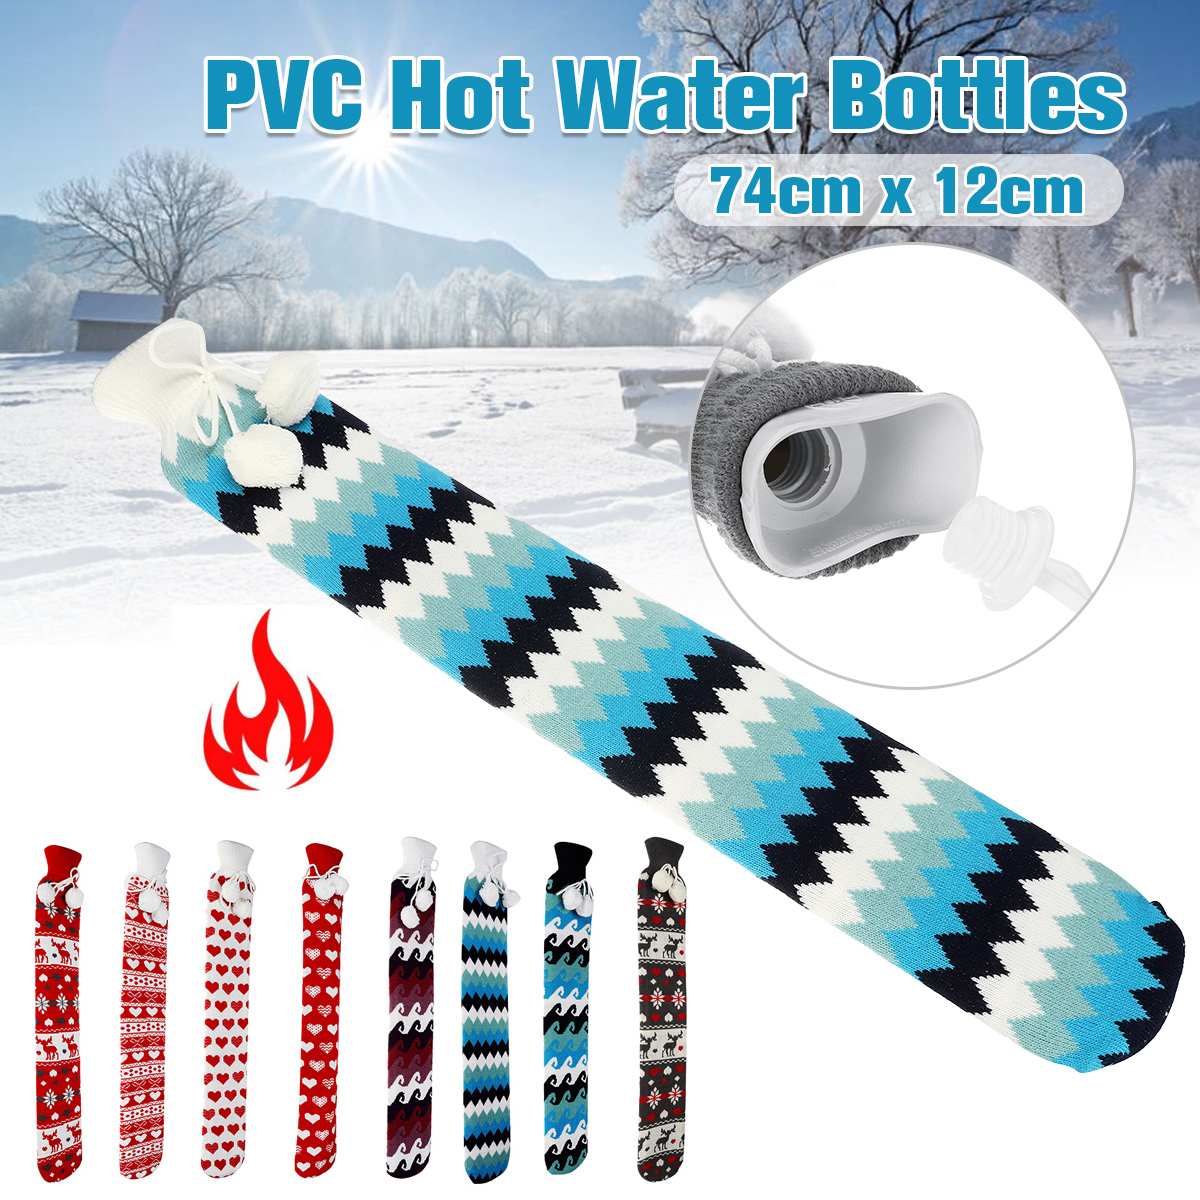 Cute 74 x 12cm Extra Long Winter Warm Hot Water Bottles With Knitted Removable Cover Warm Belly Portable Hot Water Bags